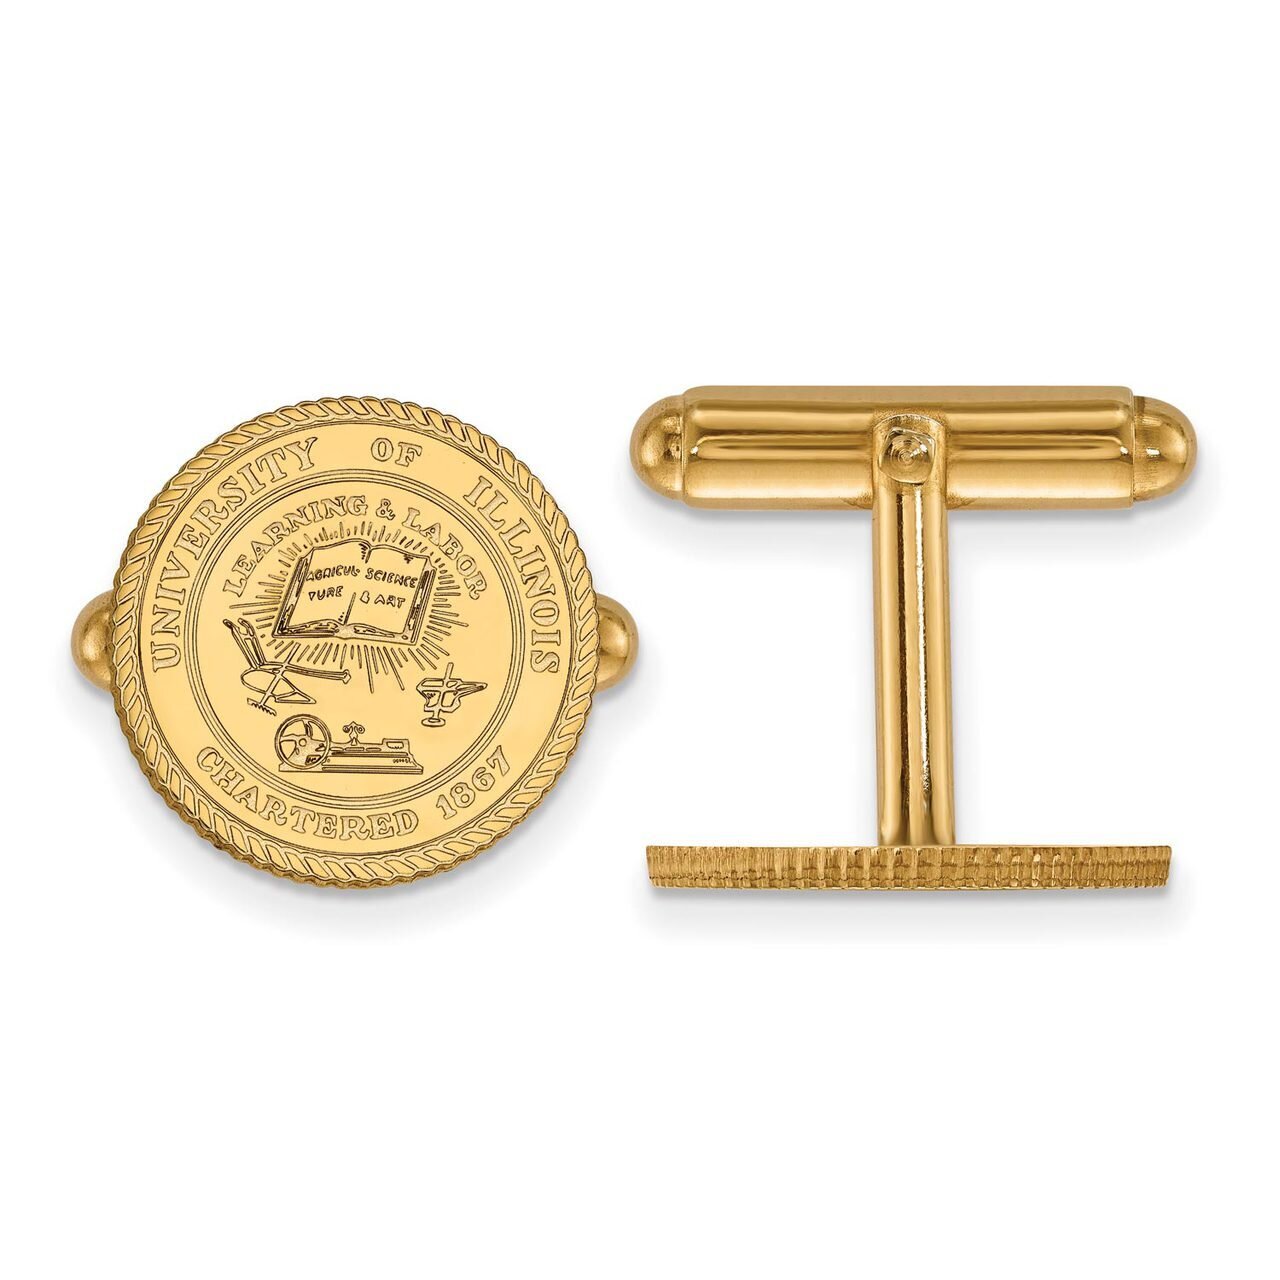 University of Illinois Crest Cufflinks Gold-plated Silver GP067UIL